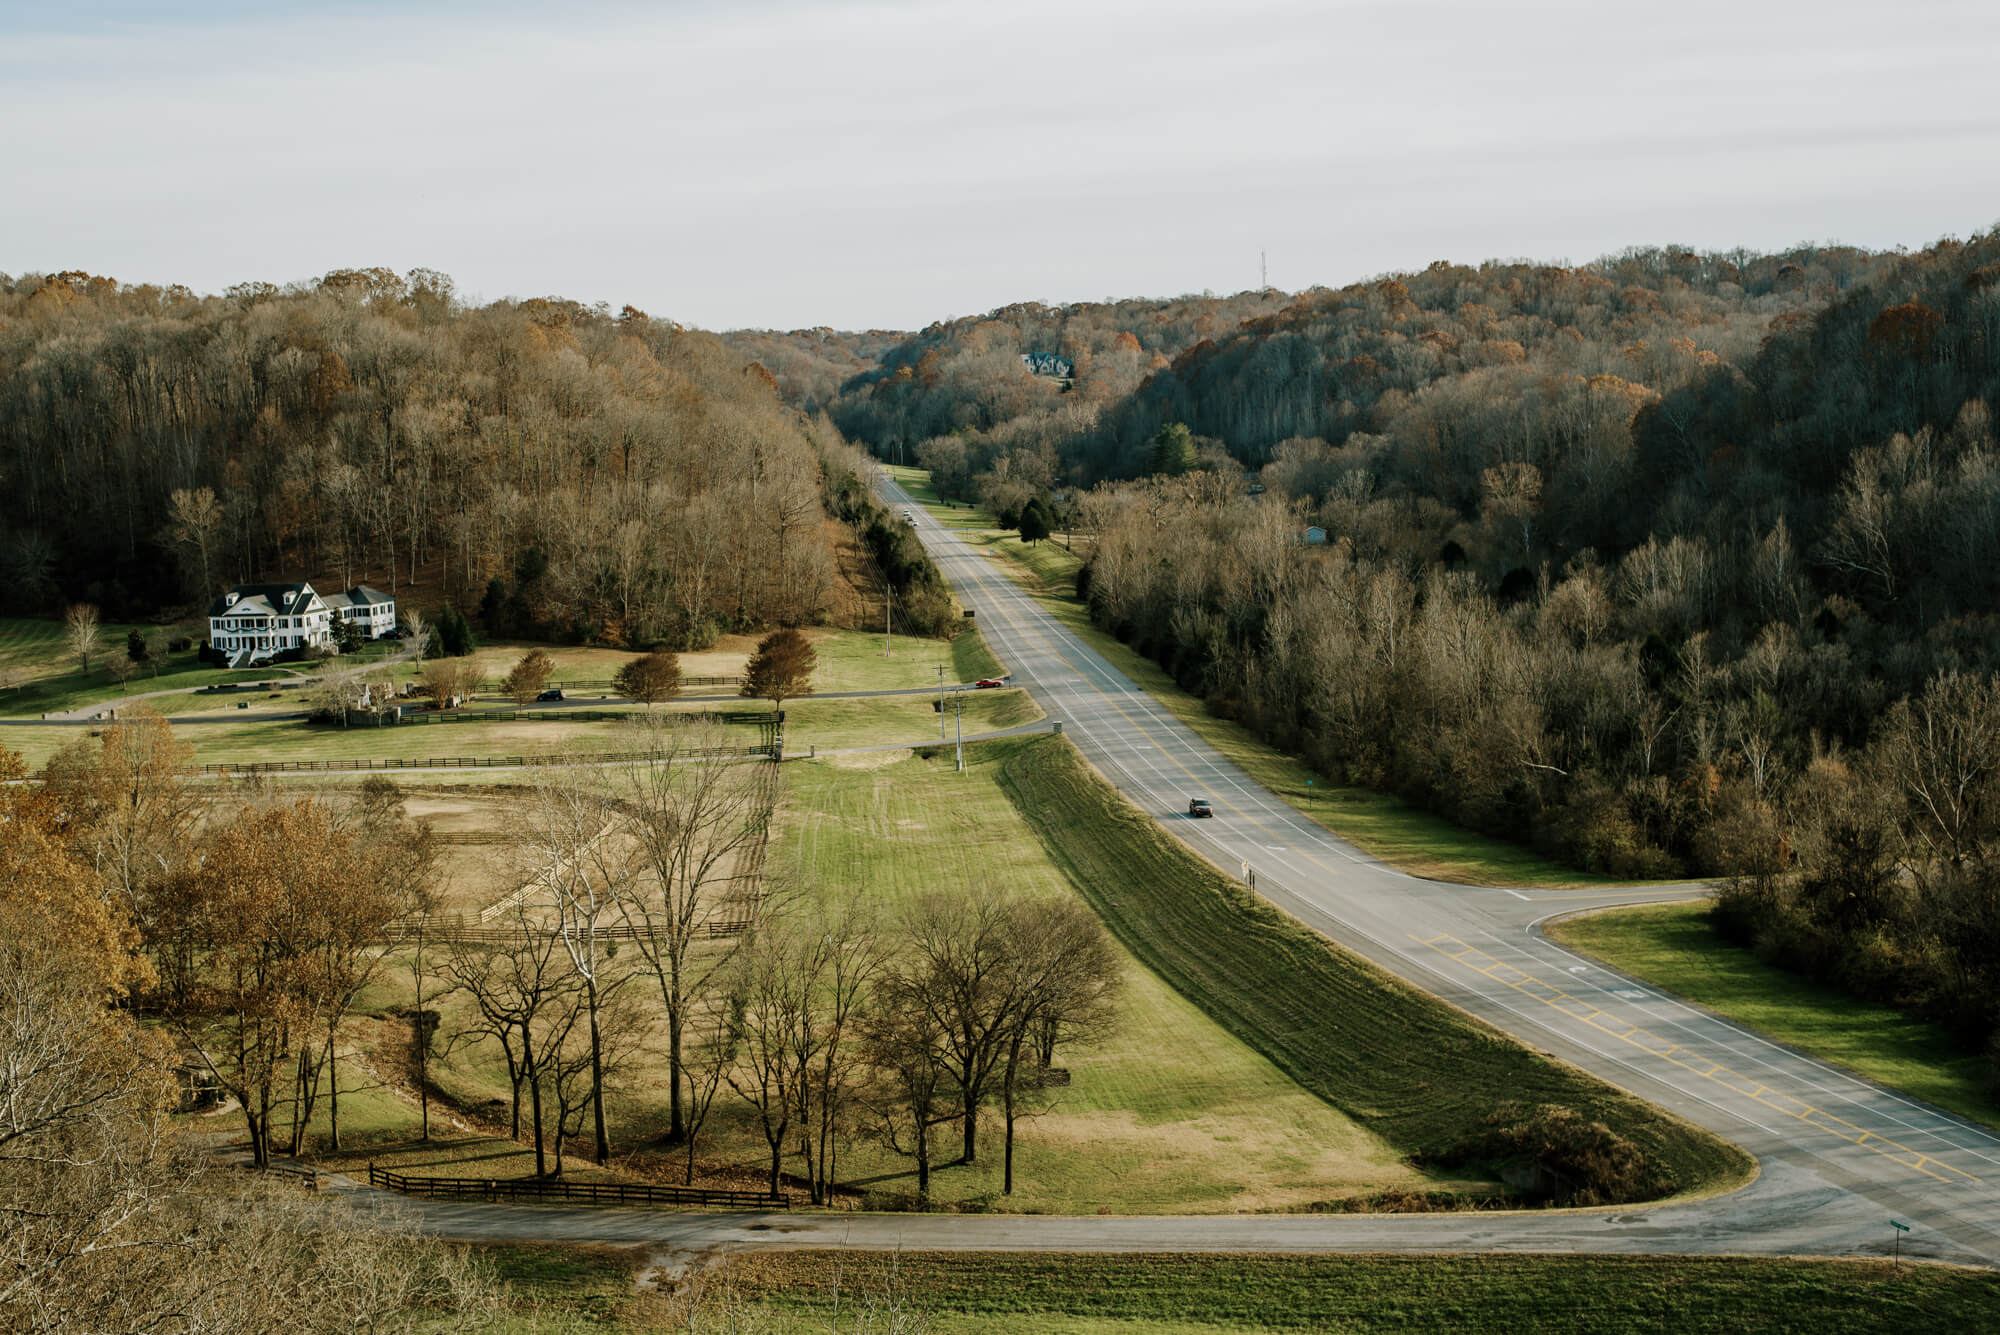 a stretch of state route 96 on the Natchez Trace in Nashville, Tennessee. It is late fall and most of the trees are bare.